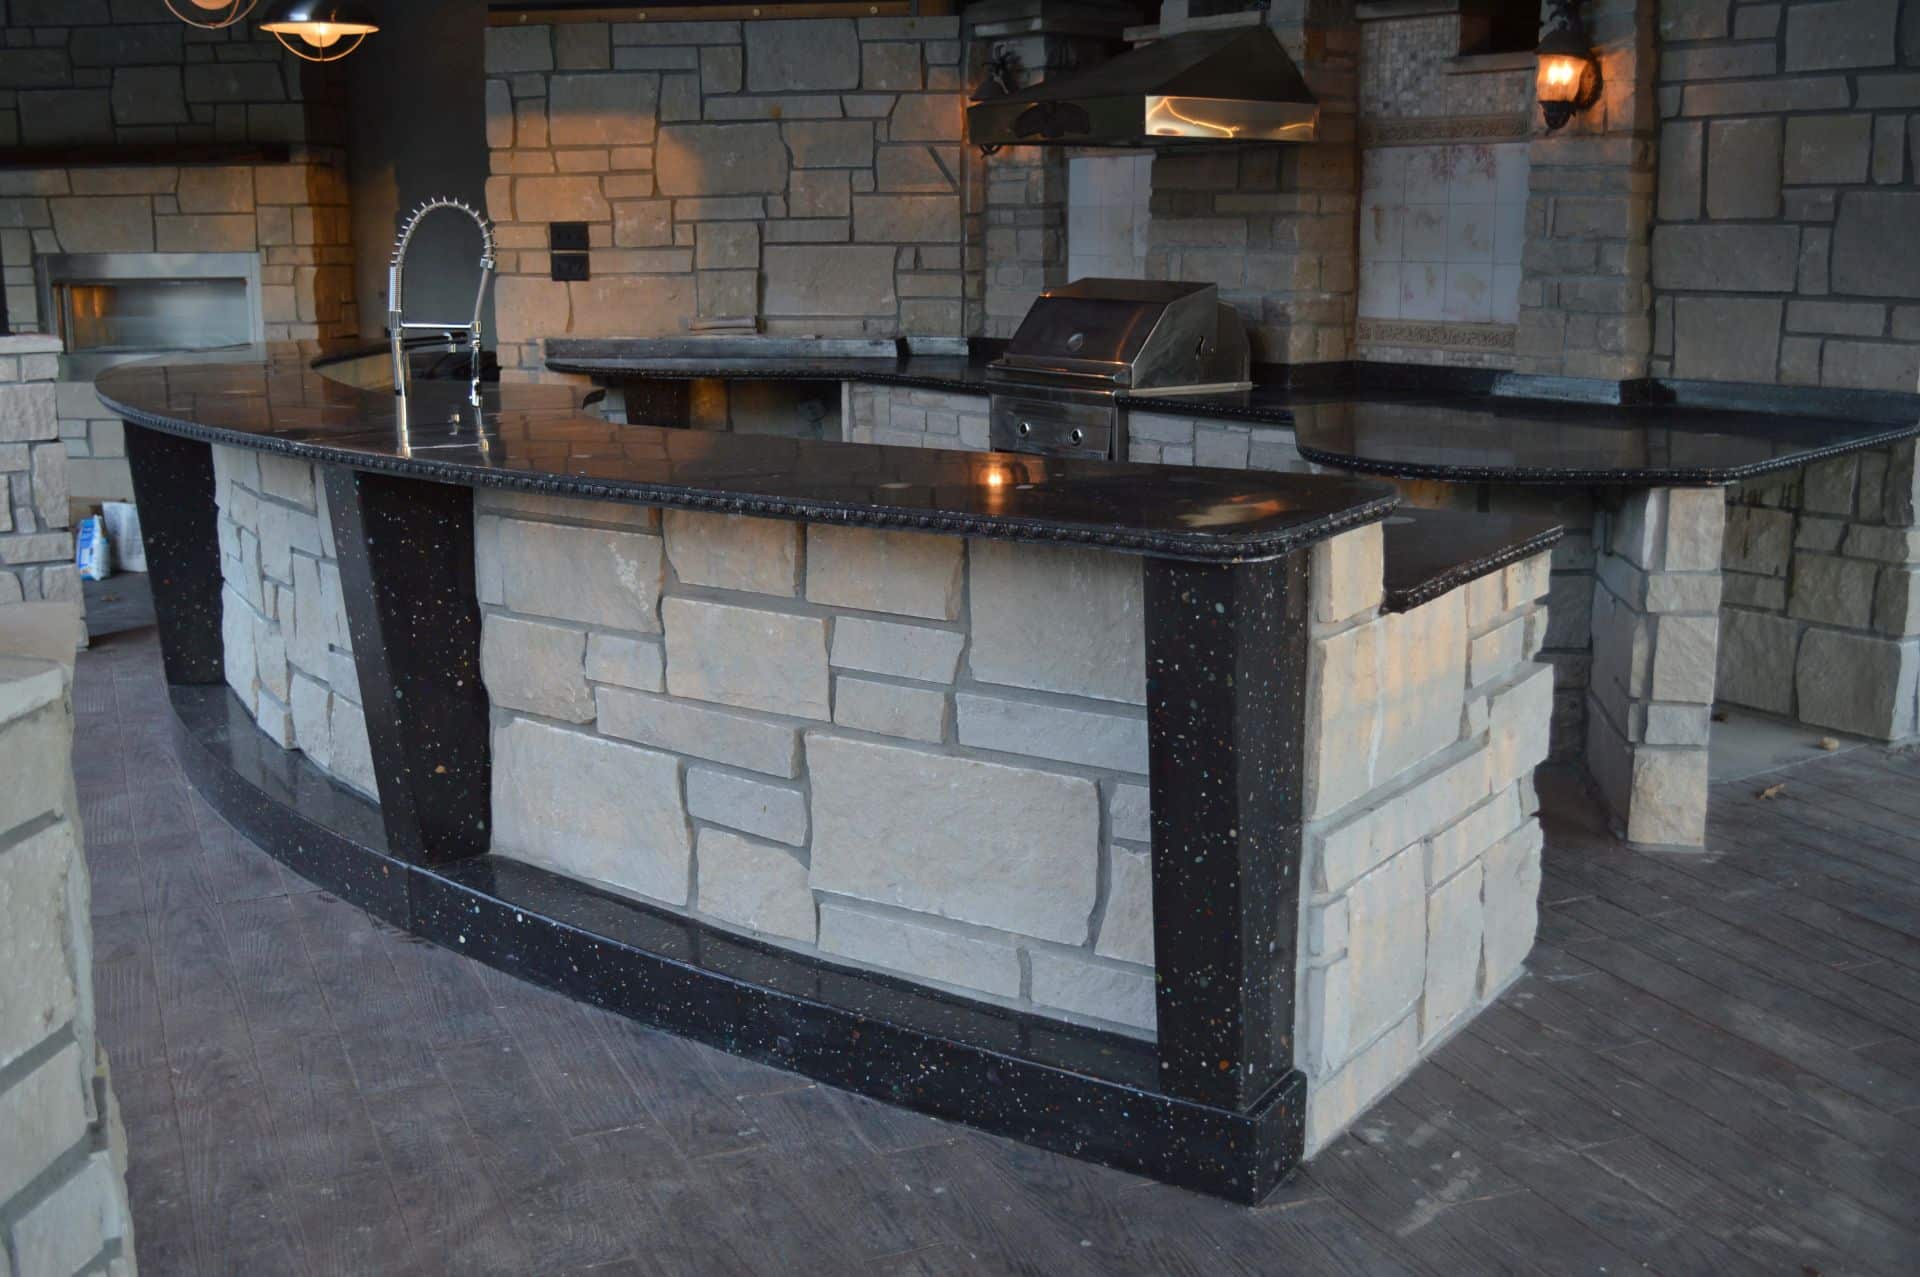 Distant 45 degree angle image of outdoor concrete counter, grill behind